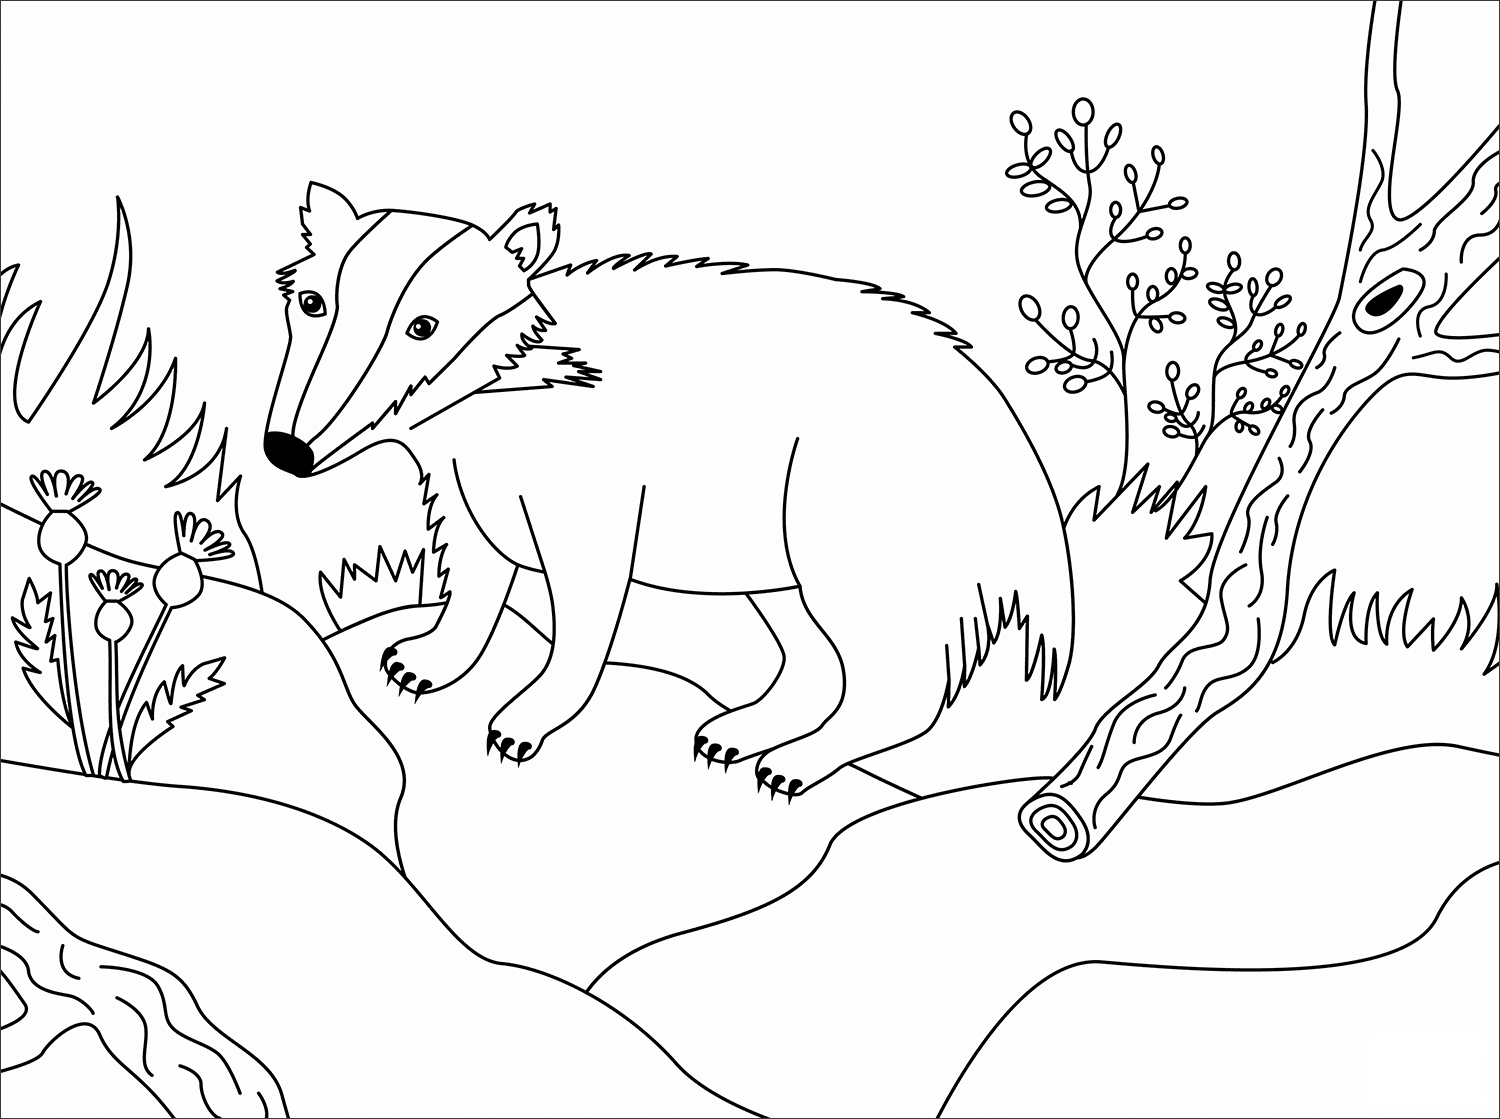 Badger Animal Simple Coloring Page